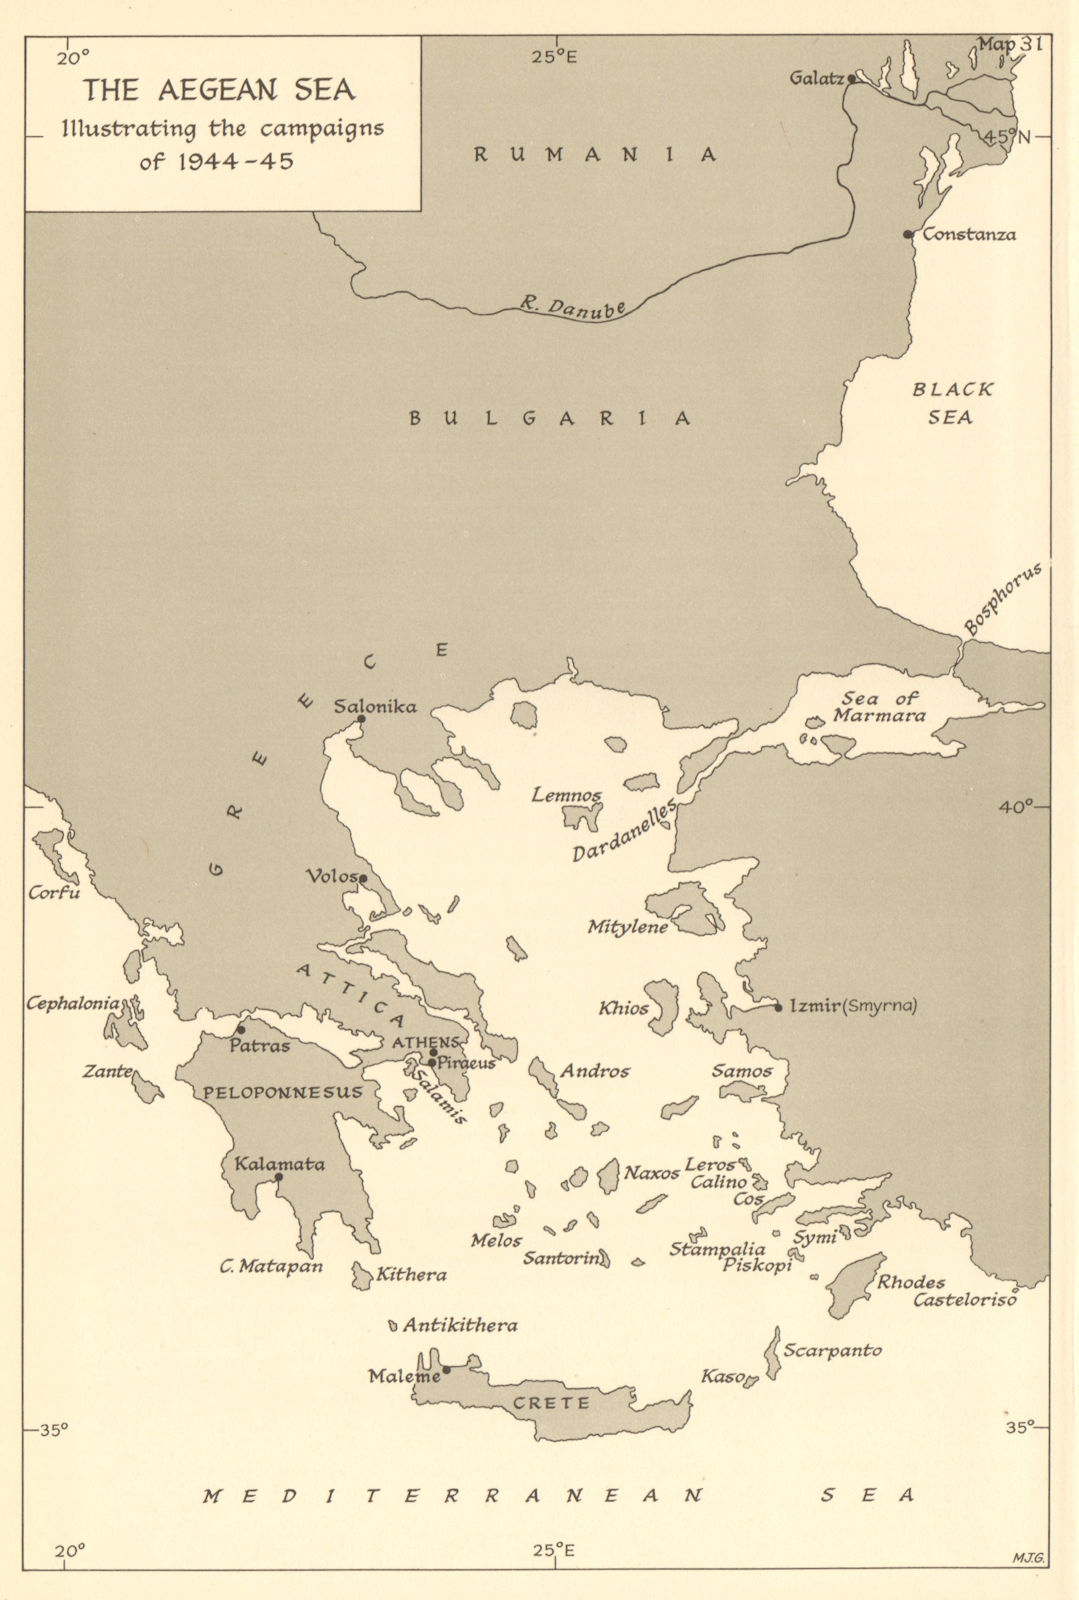 Associate Product Aegean Sea illustrating the naval campaigns of 1944-45. World War 2 1961 map